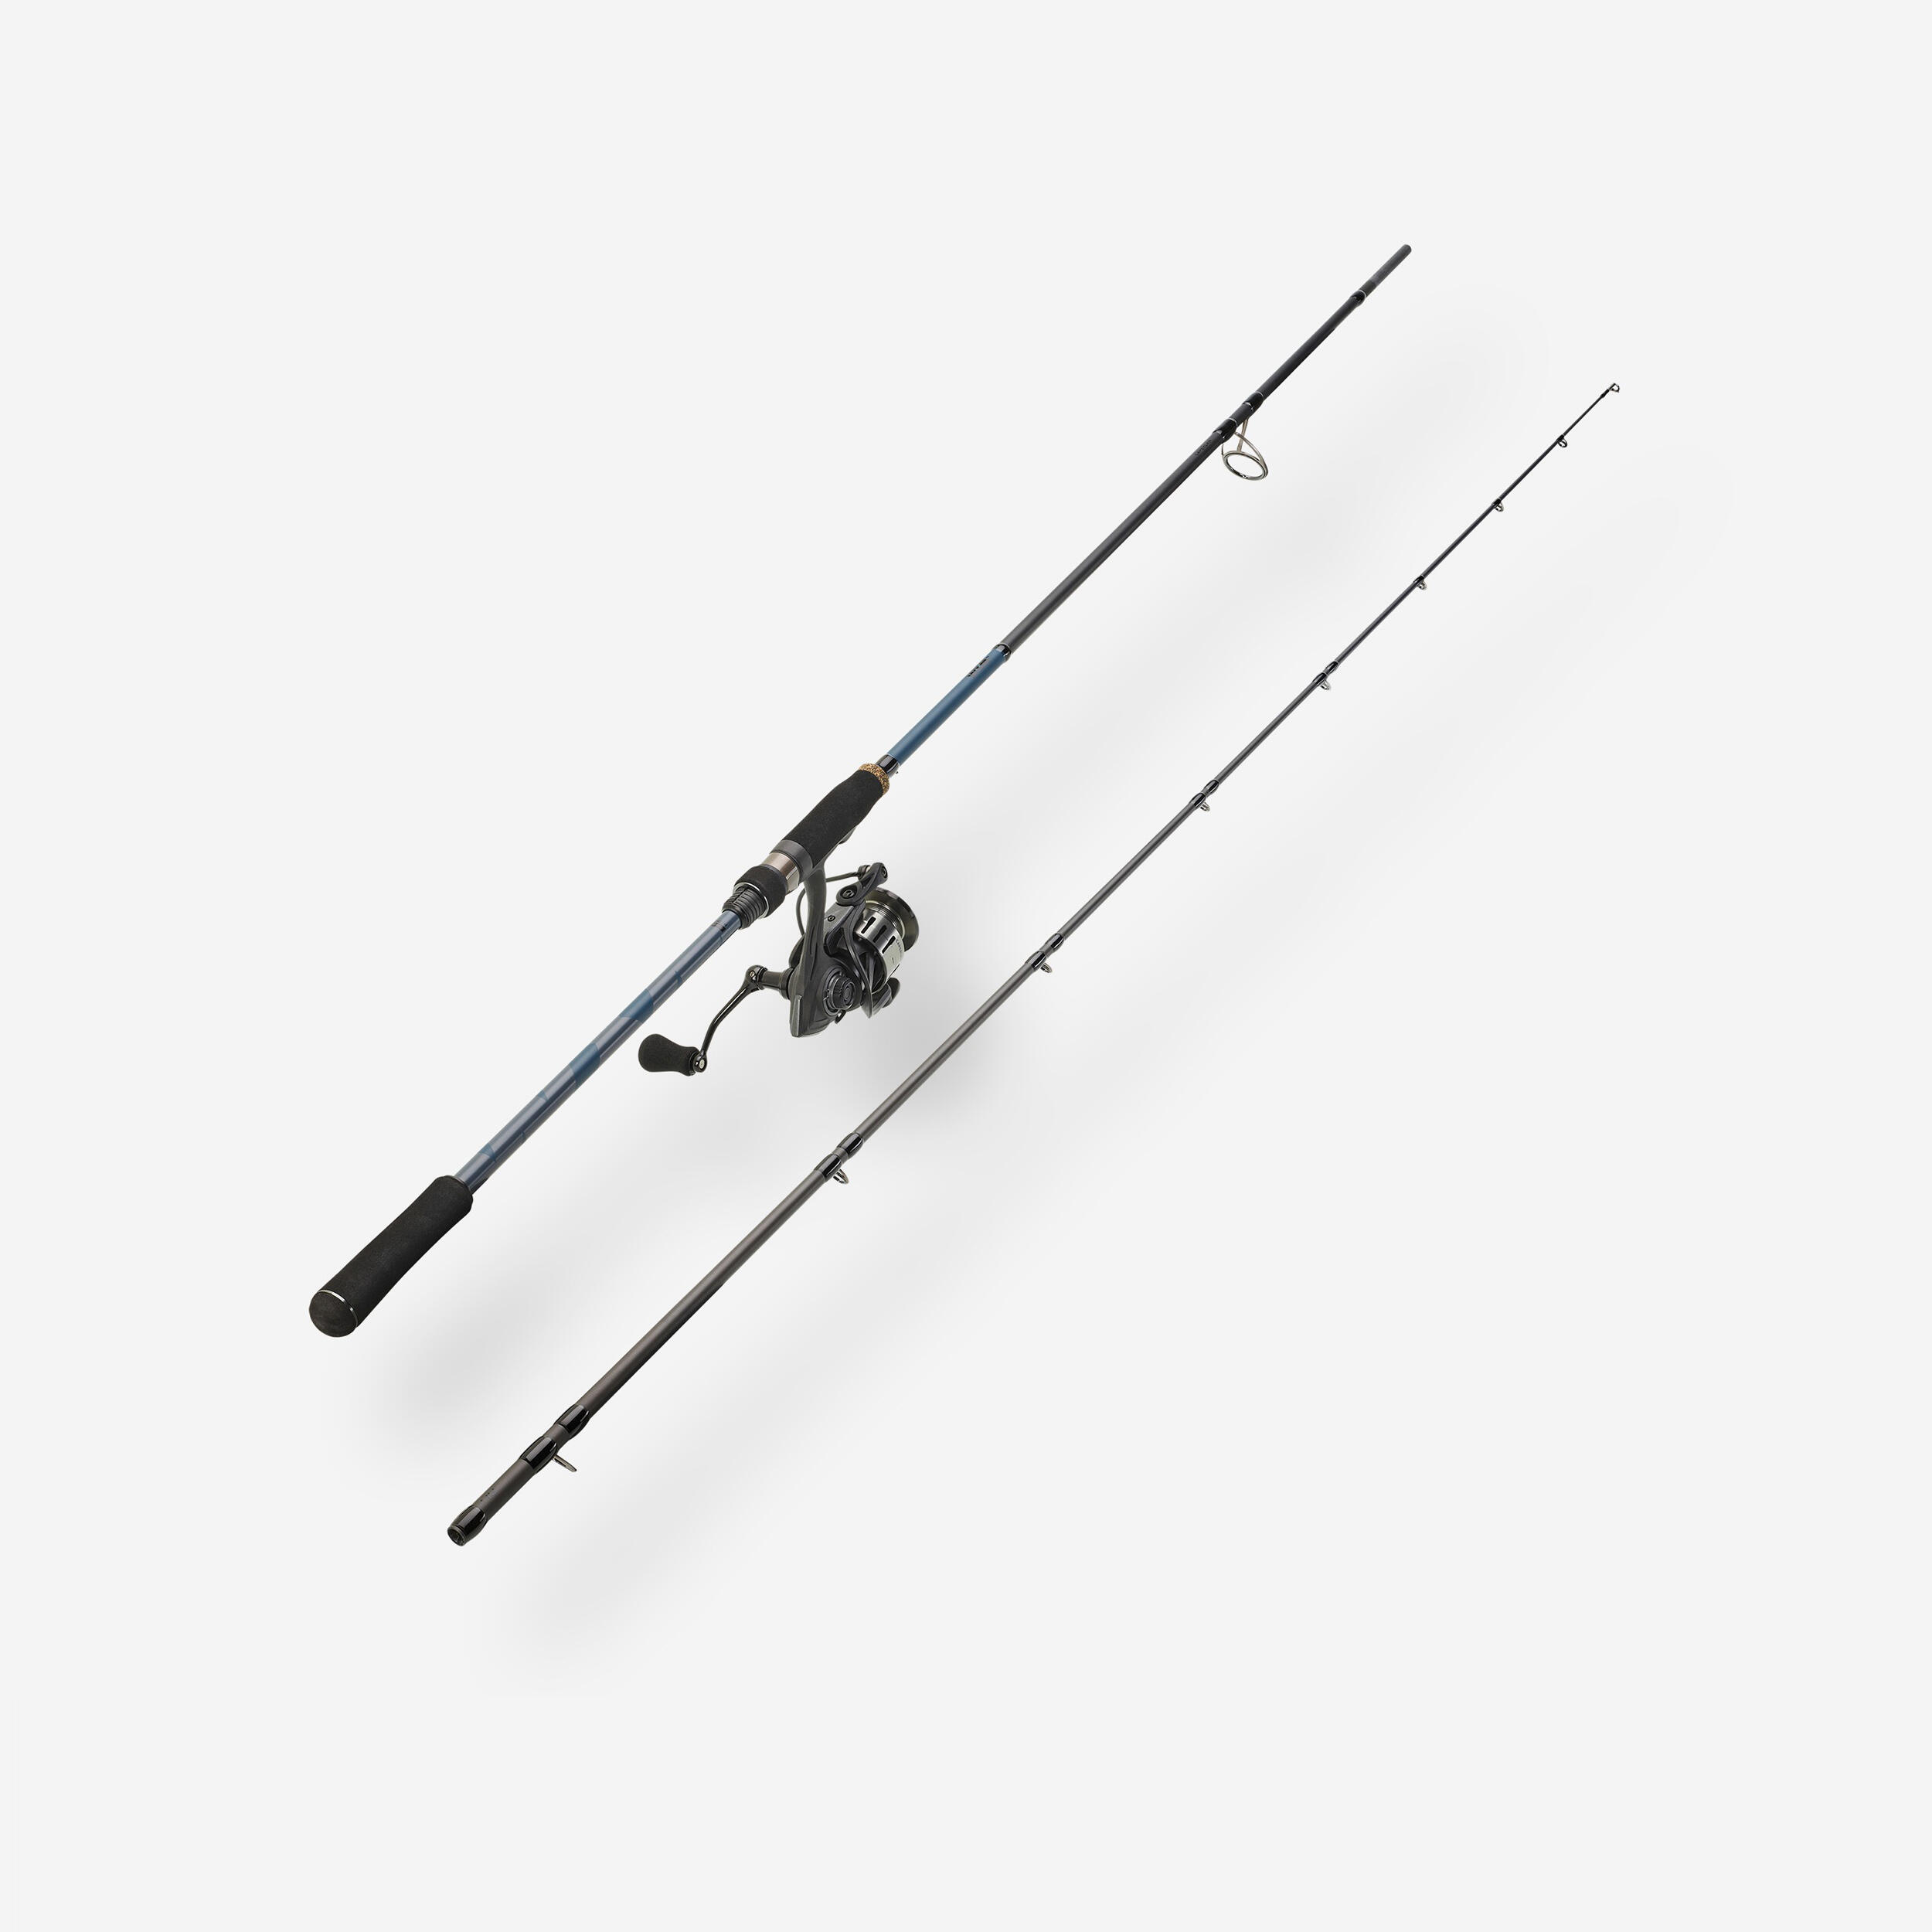 Caperlan Combo Lure Fishing Rod And Reel Wxm-5 240 H - One Size